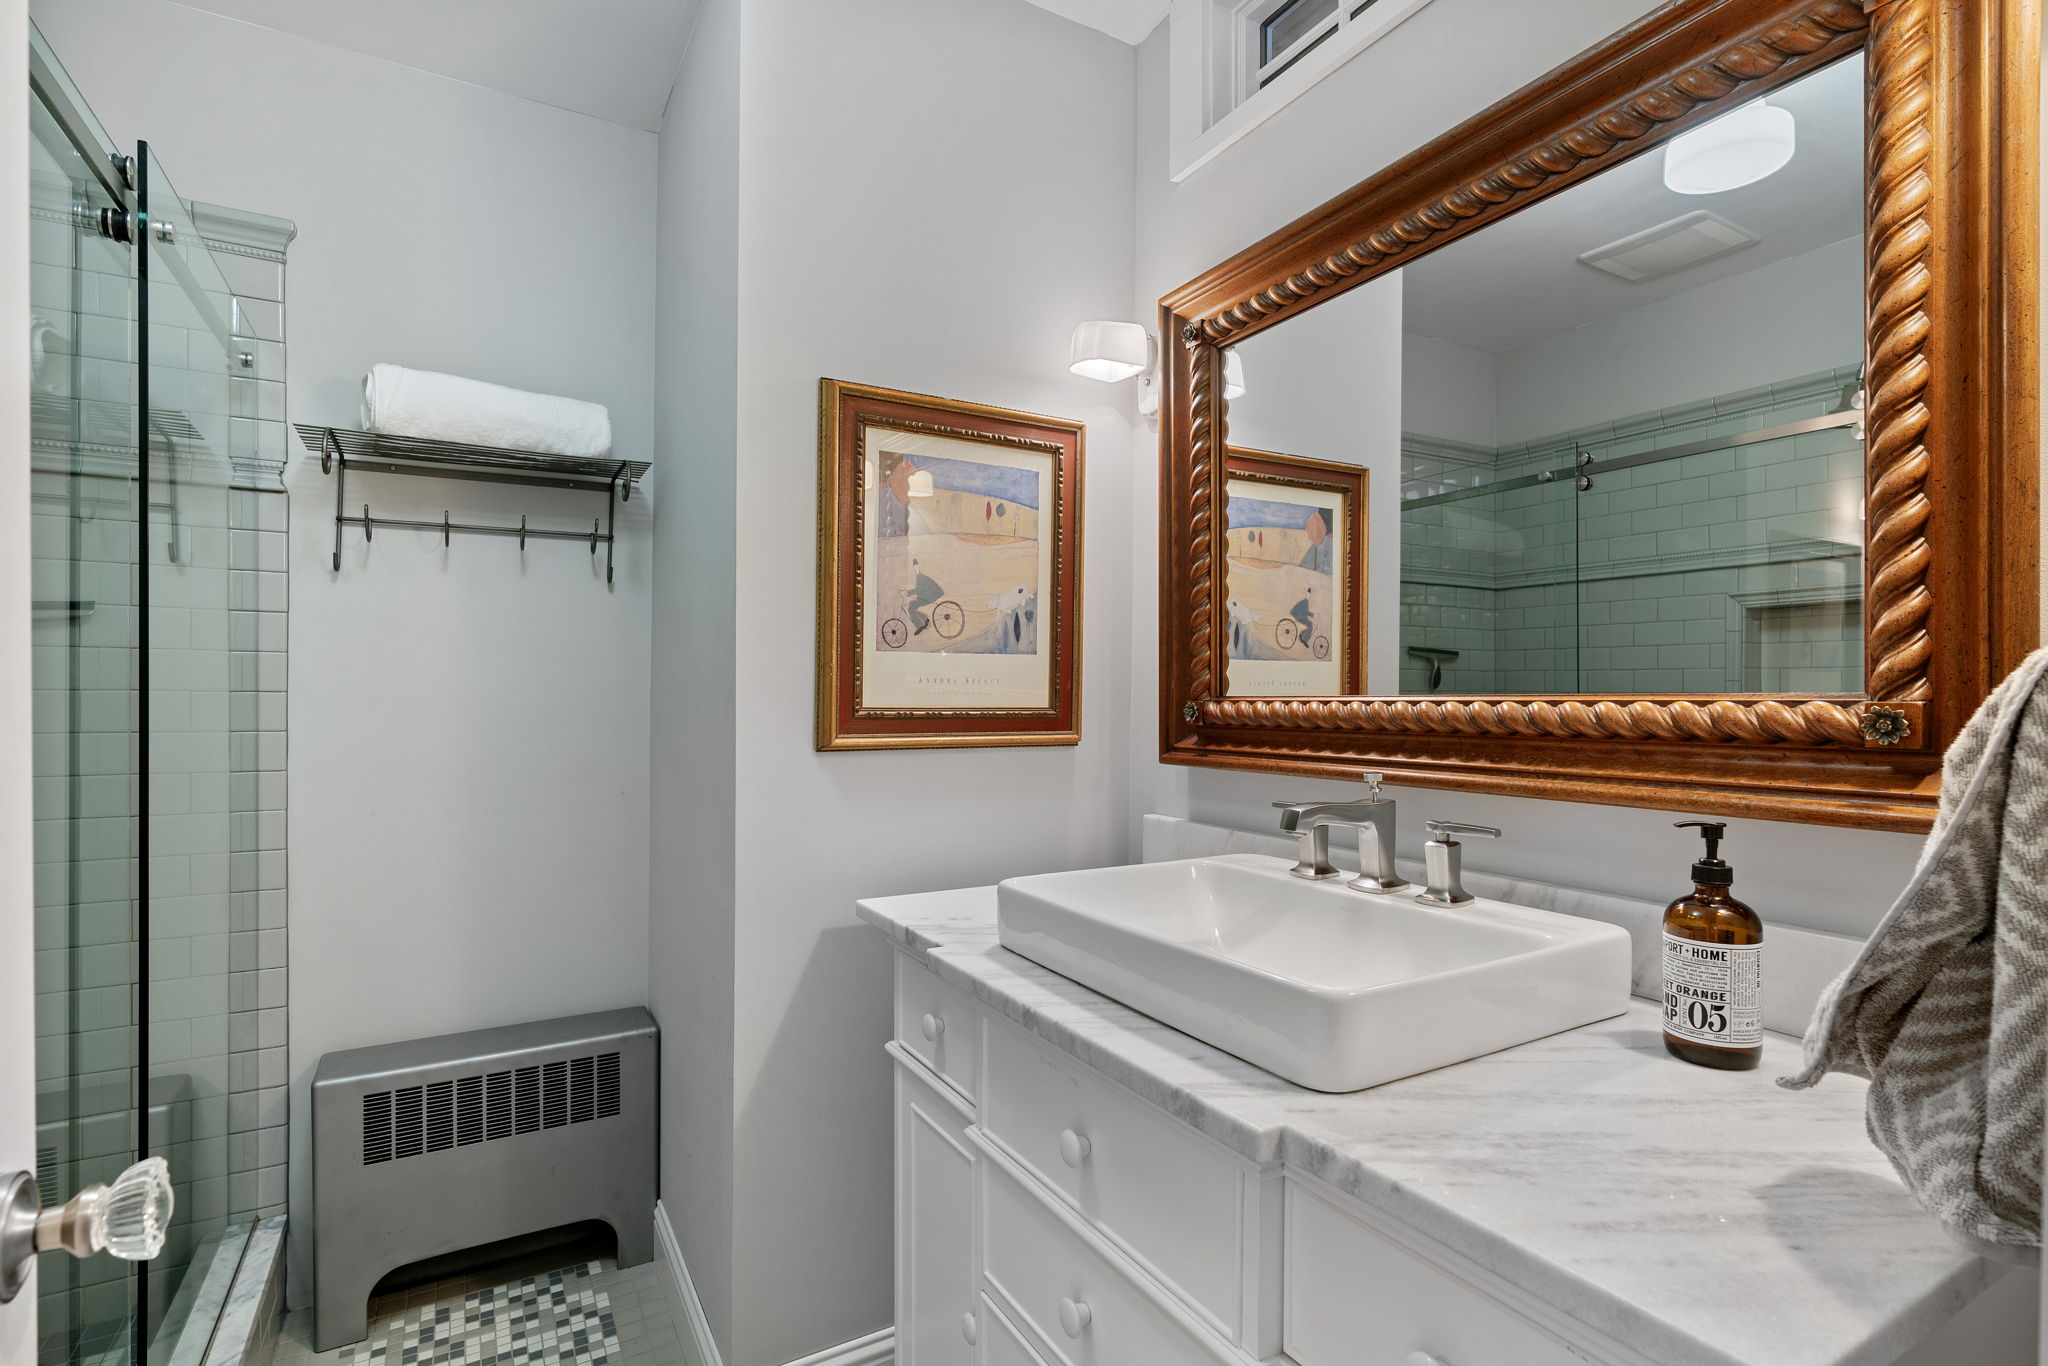 Fully remodeled bathroom with a beautiful walk-in shower.